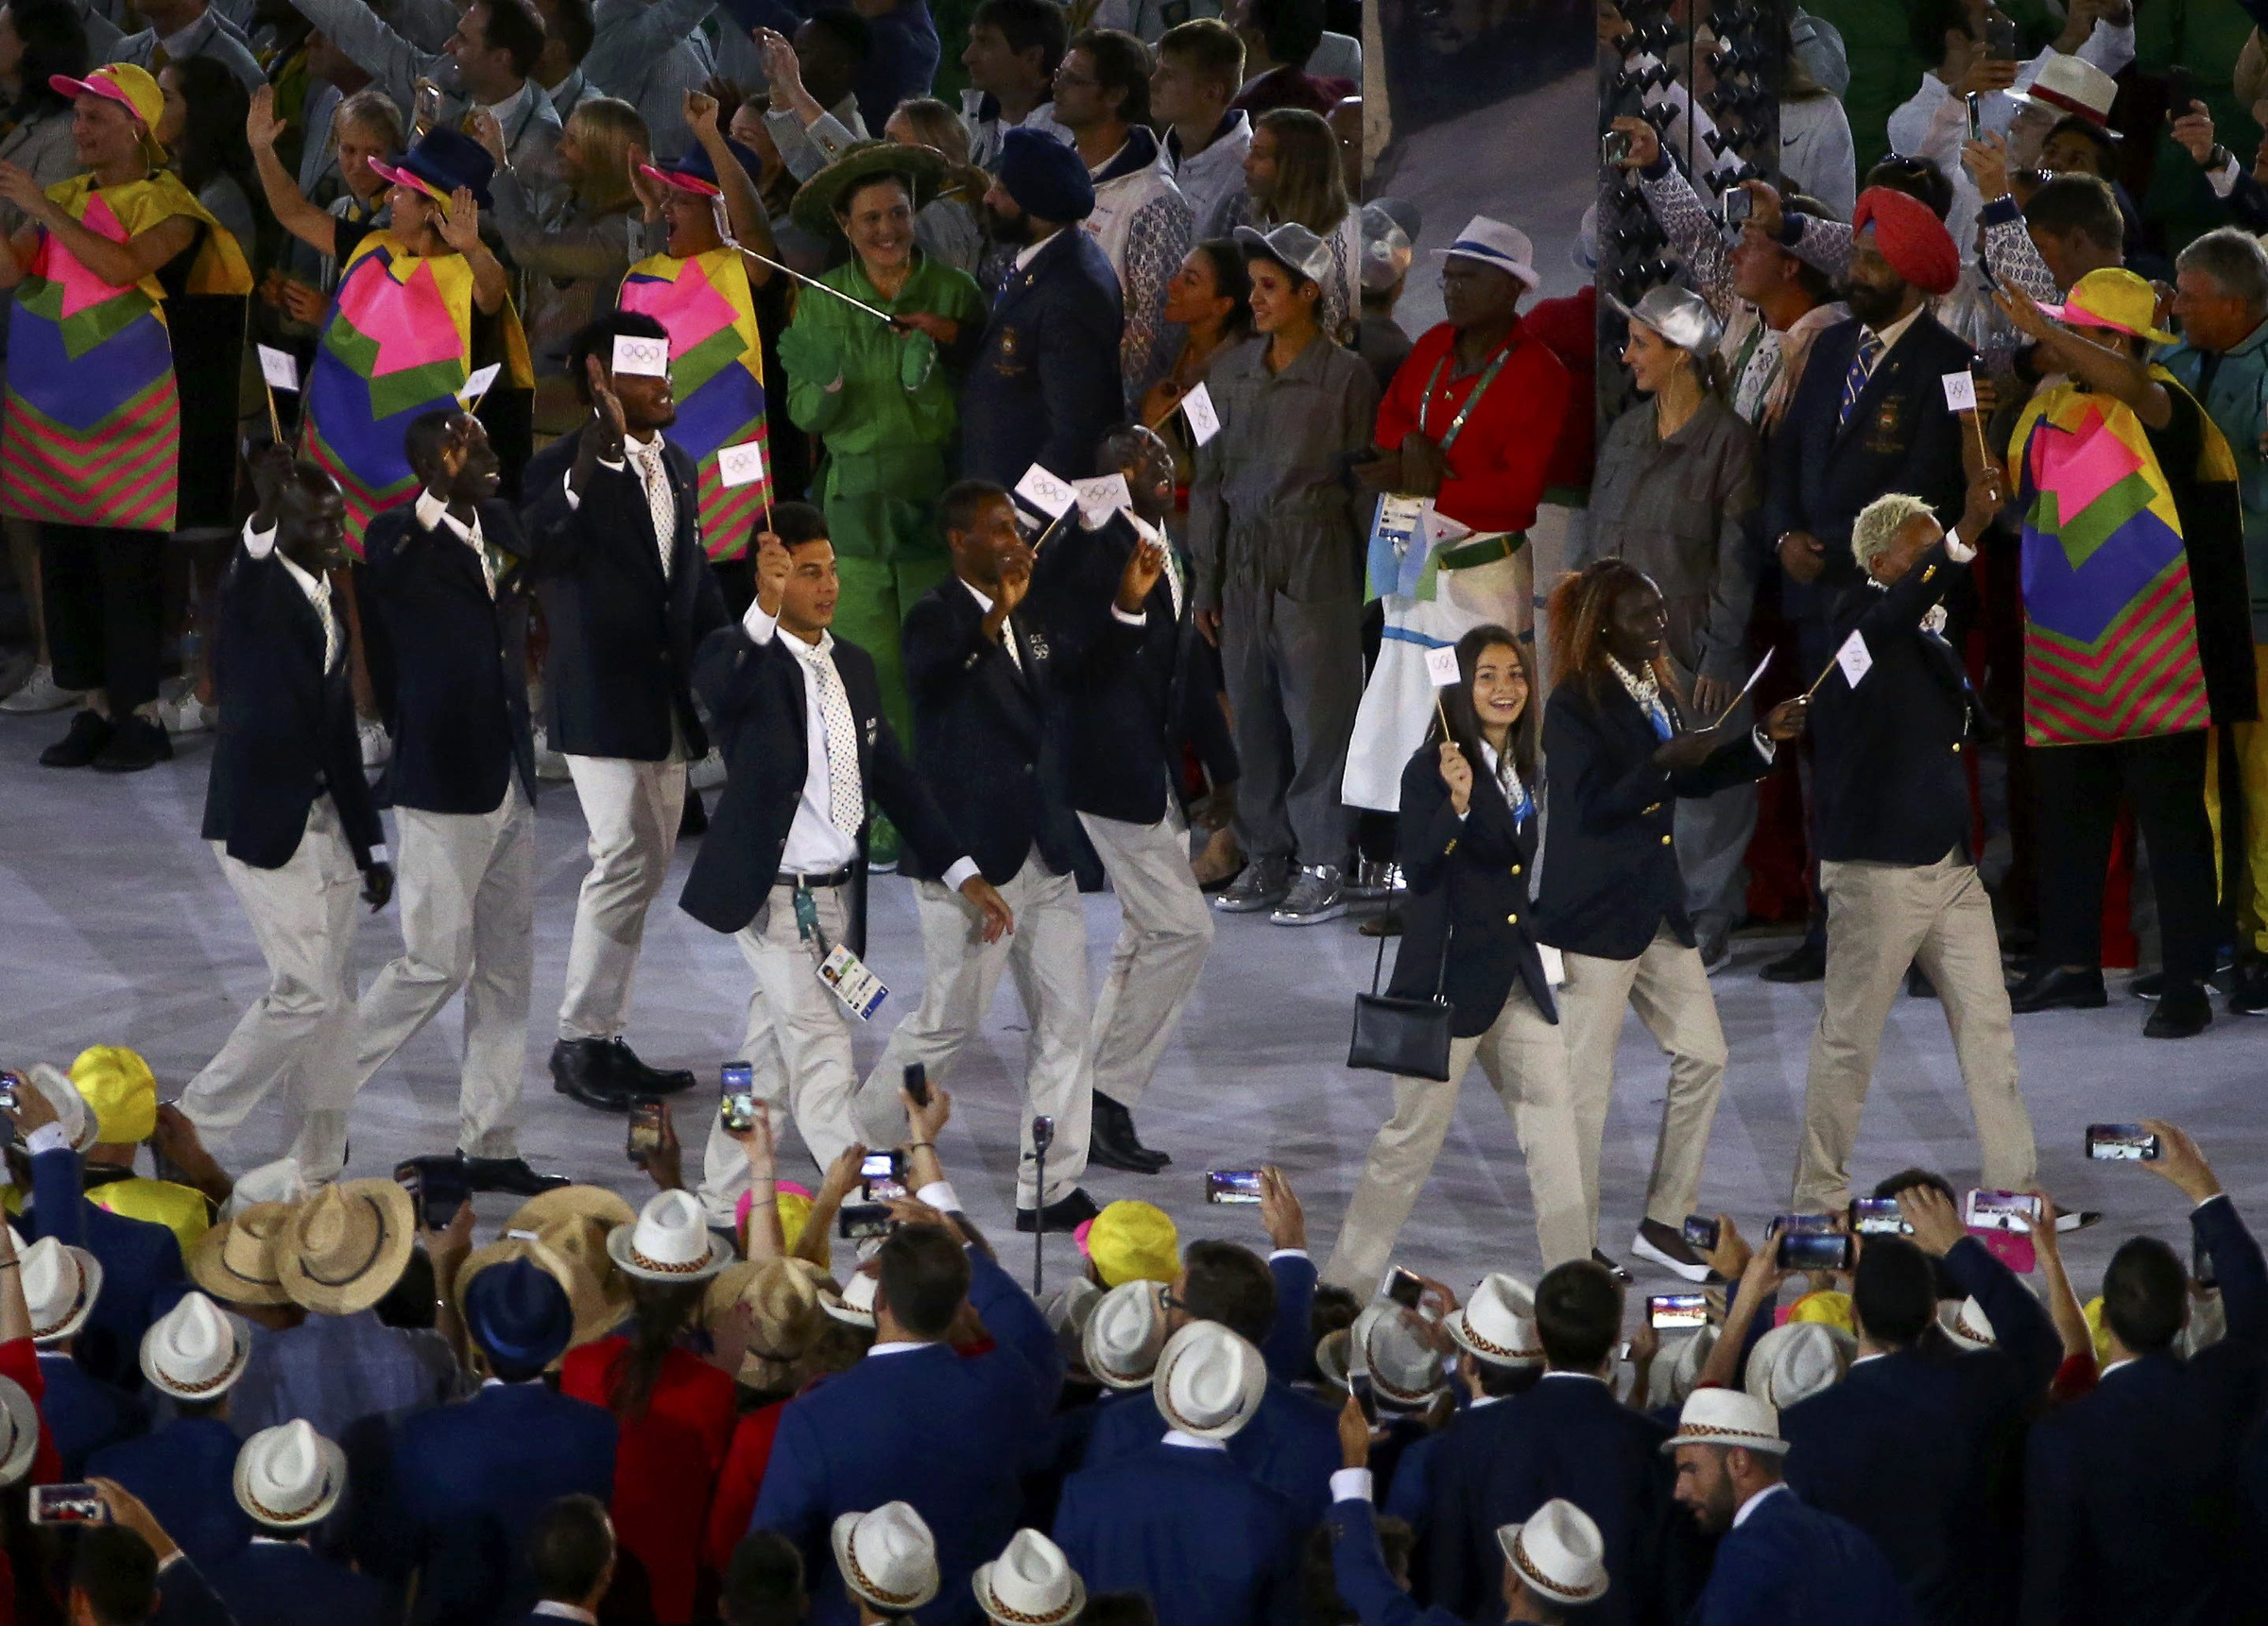 The new Refugee Olympic Team arrives for the opening ceremony in Rio de Janeiro Aug. 5. In a personal message addressed to each of the 10 members of the new Refugee Olympic Team, Pope Francis wished them success in their events and thanked them for the witness they are giving the world. (CNS photo/David Gray, Reuters)